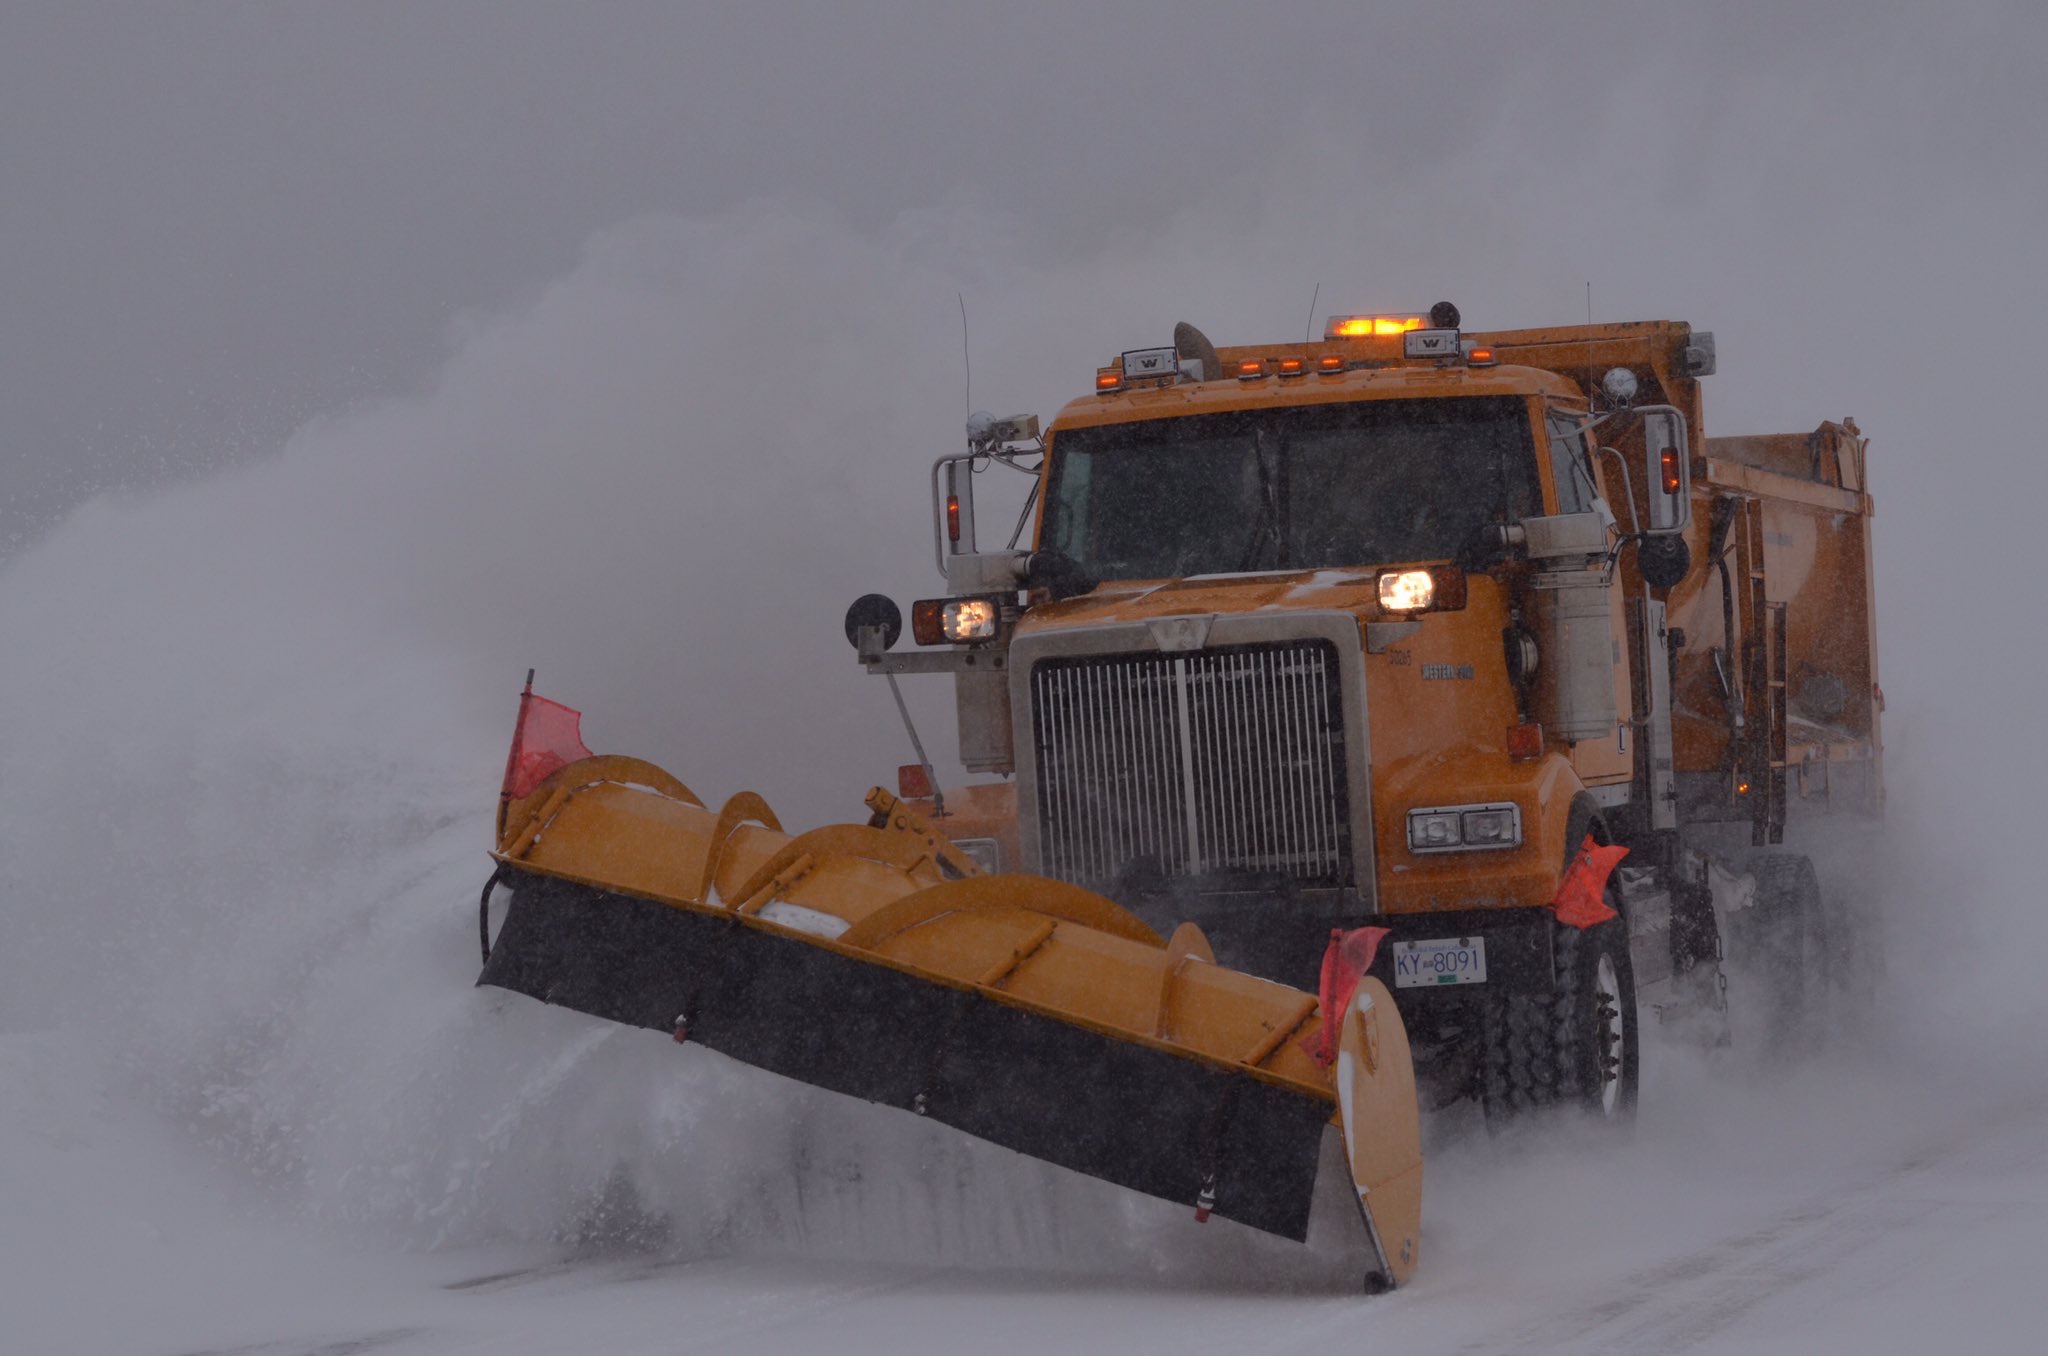 Snow plow safety Do's and Don'ts - Mainroad Group